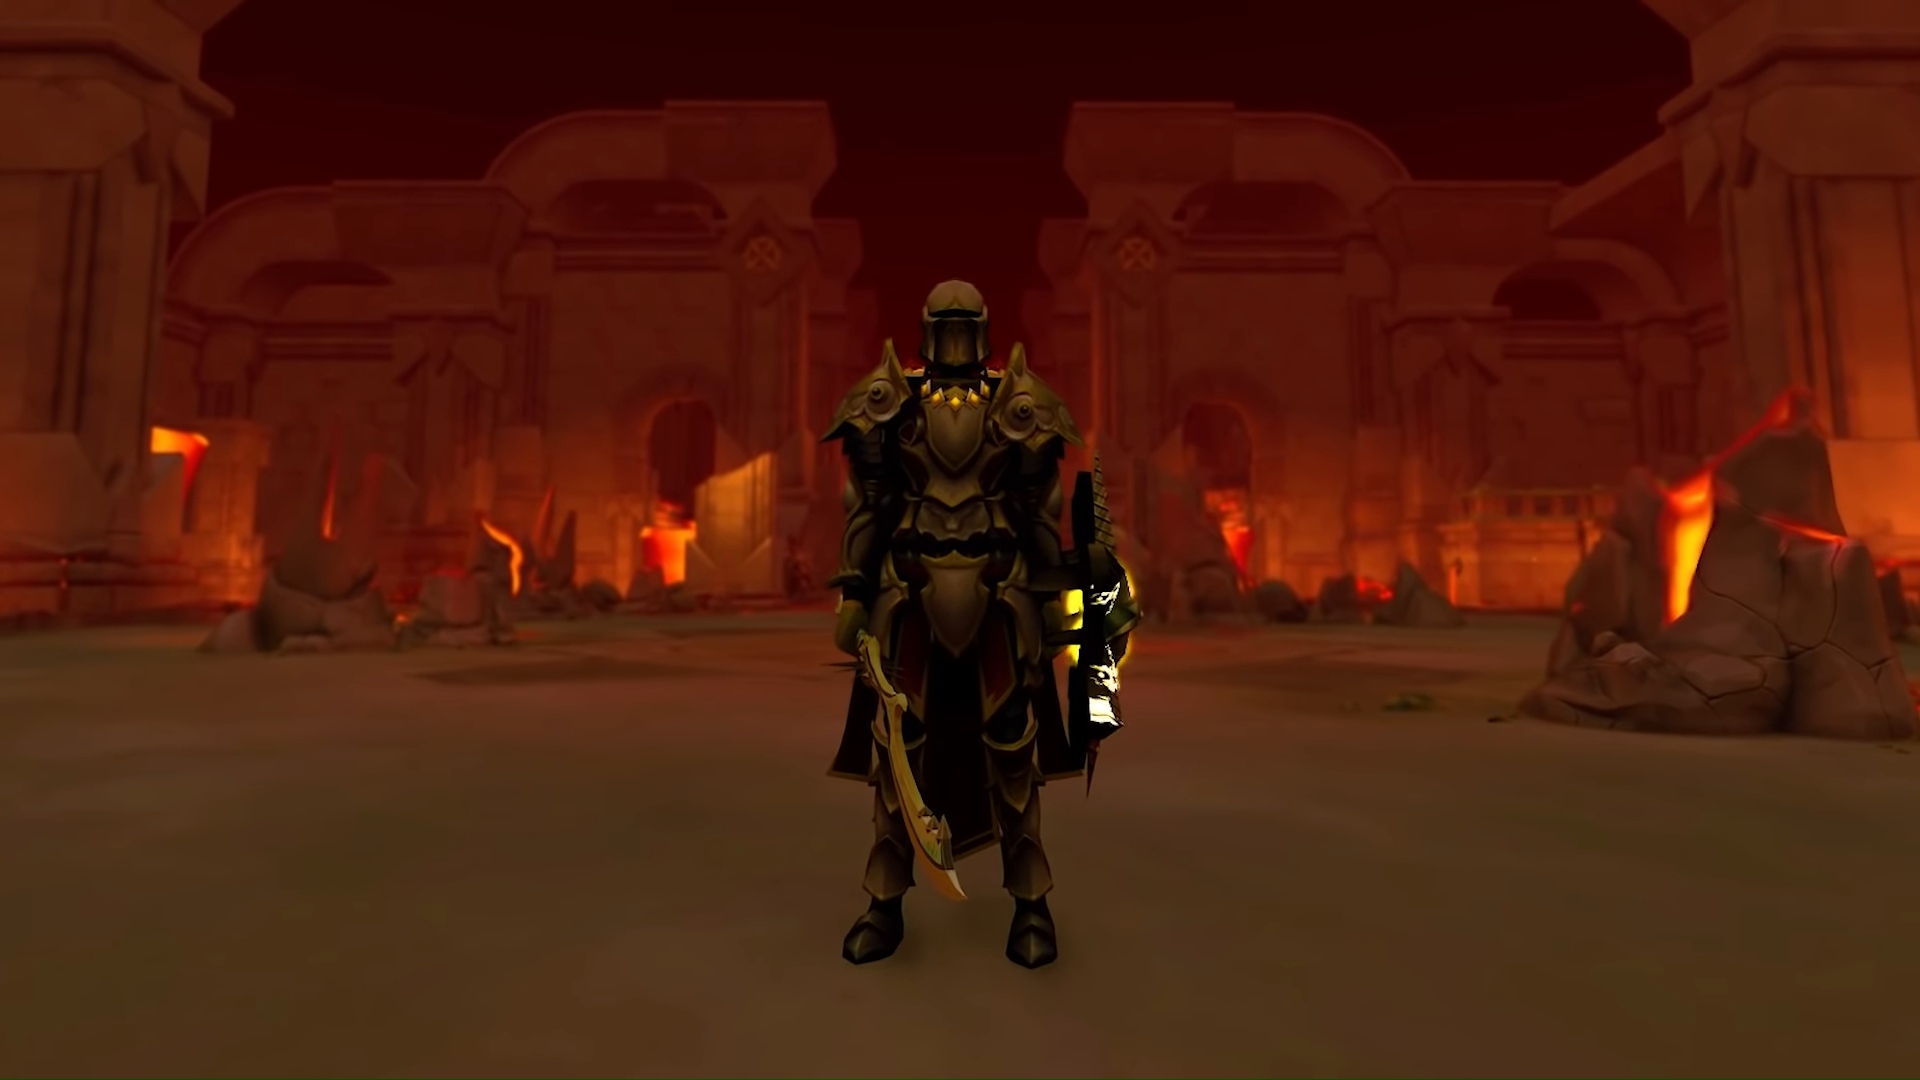 Best PC games for mobile devices: Runescape.  The image shows a figure standing in a dark room.